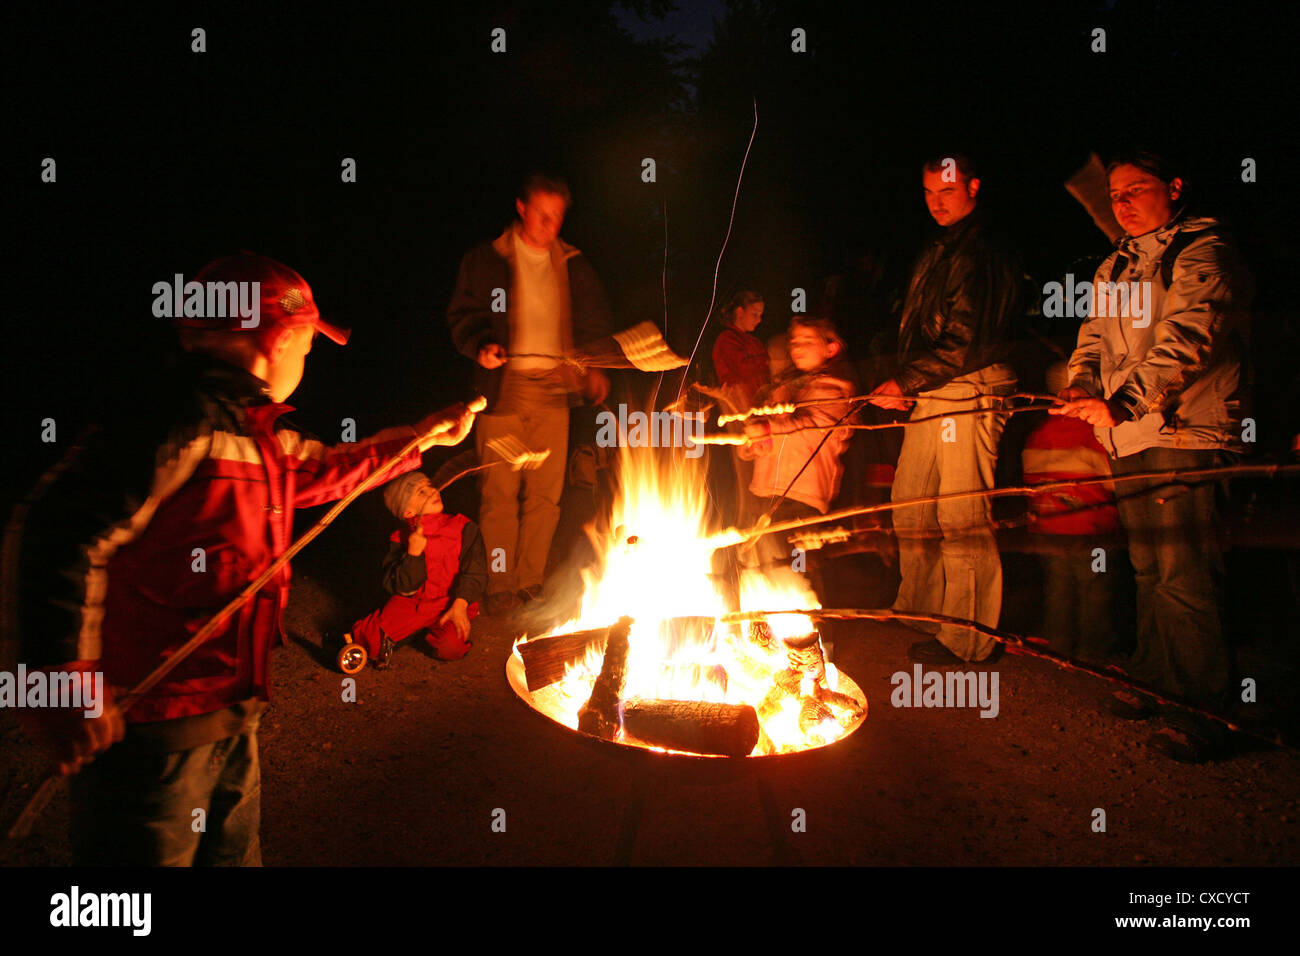 Resplendent village, people grilling sausages over an open fire Stock Photo